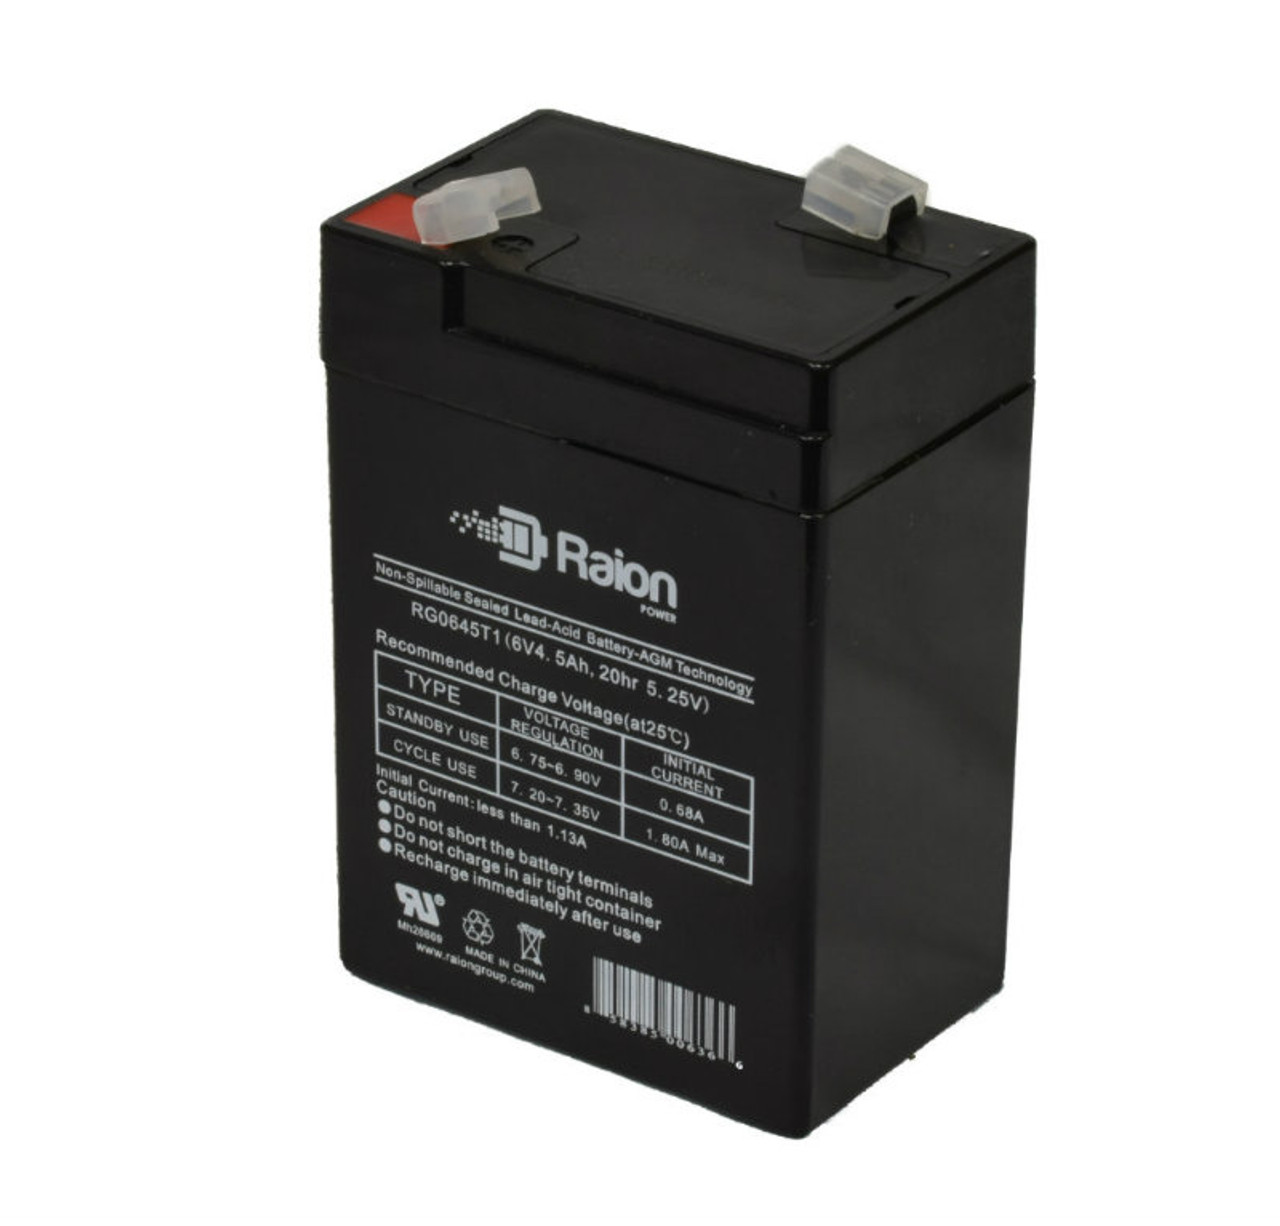 Raion Power RG0645T1 6V 4.5Ah Replacement Battery Cartridge for Light Alarms 5E15AA